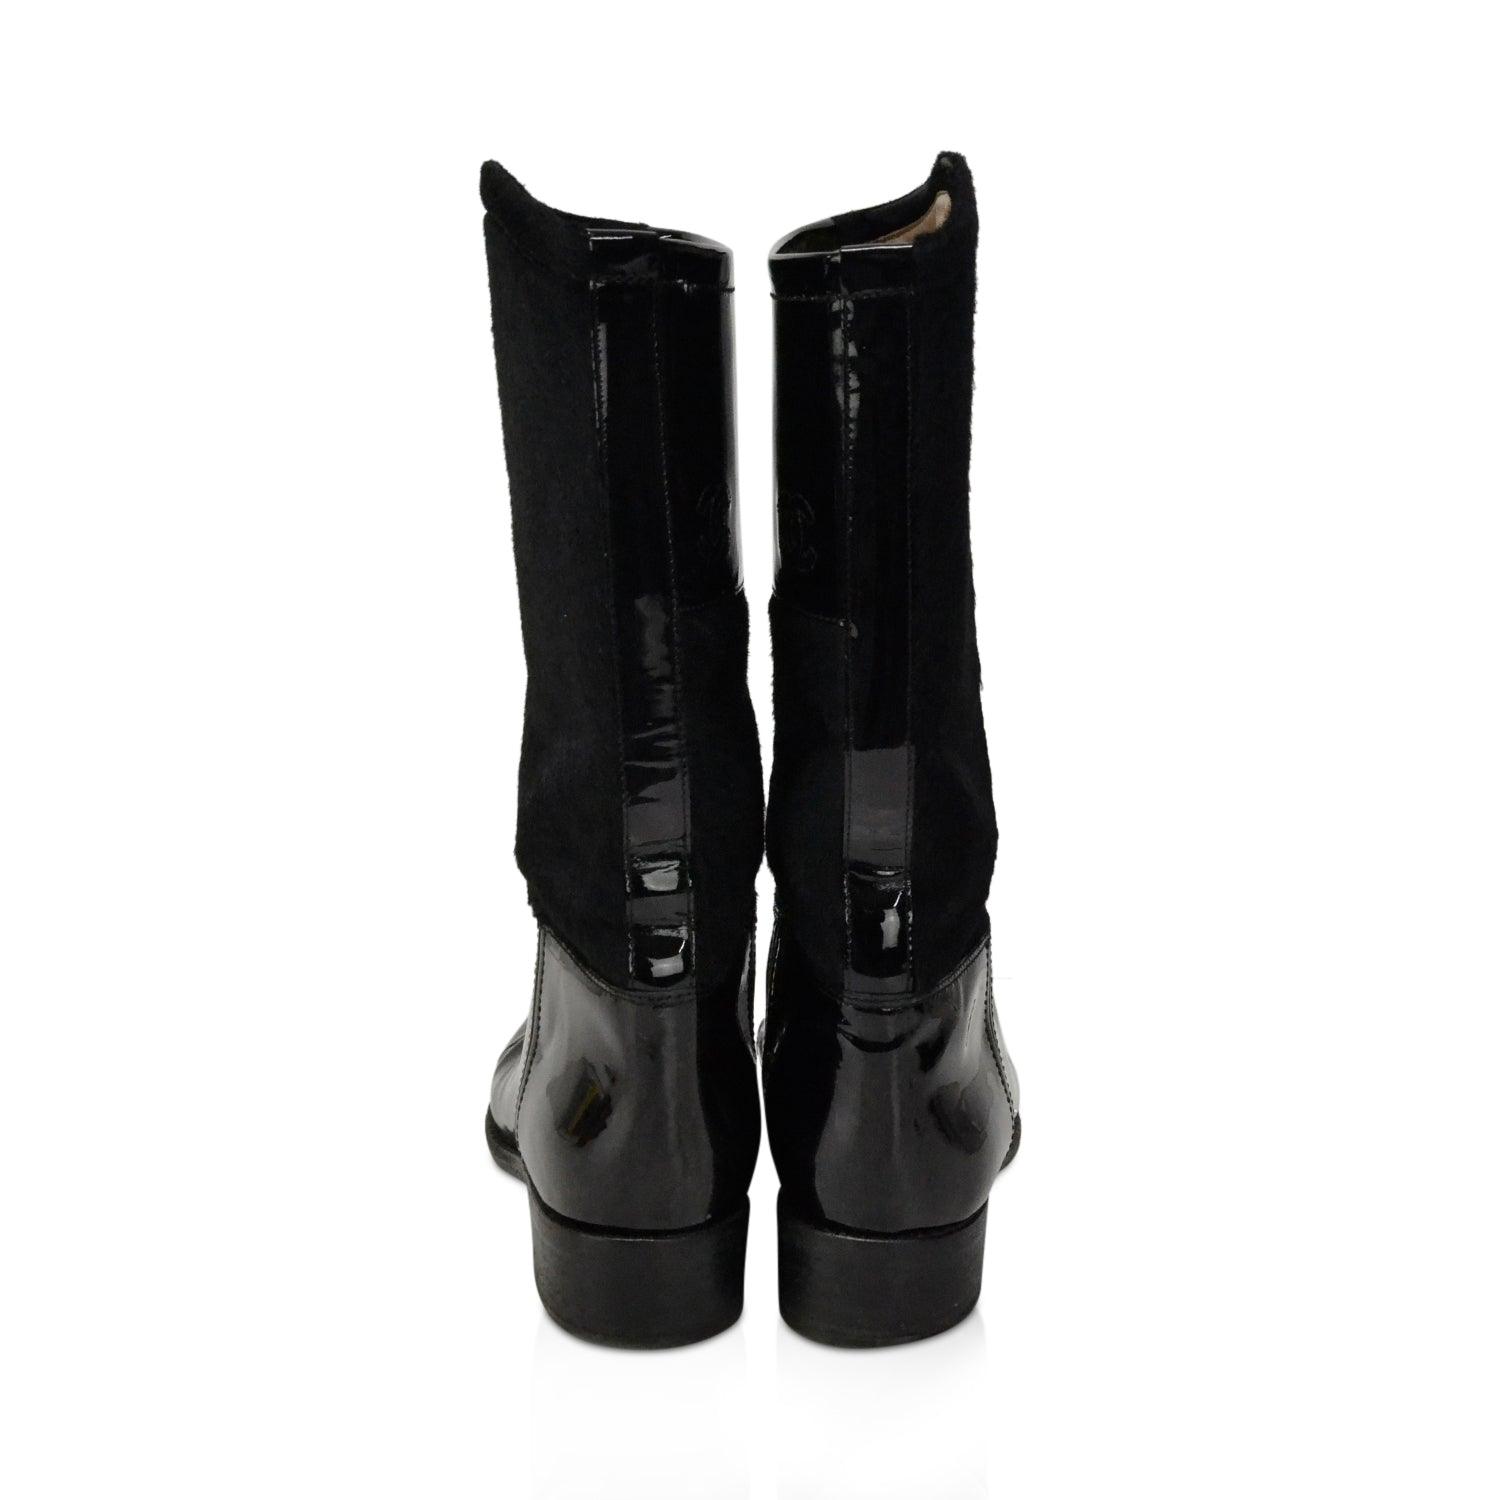 Chanel Boots - Women's 38.5 - Fashionably Yours